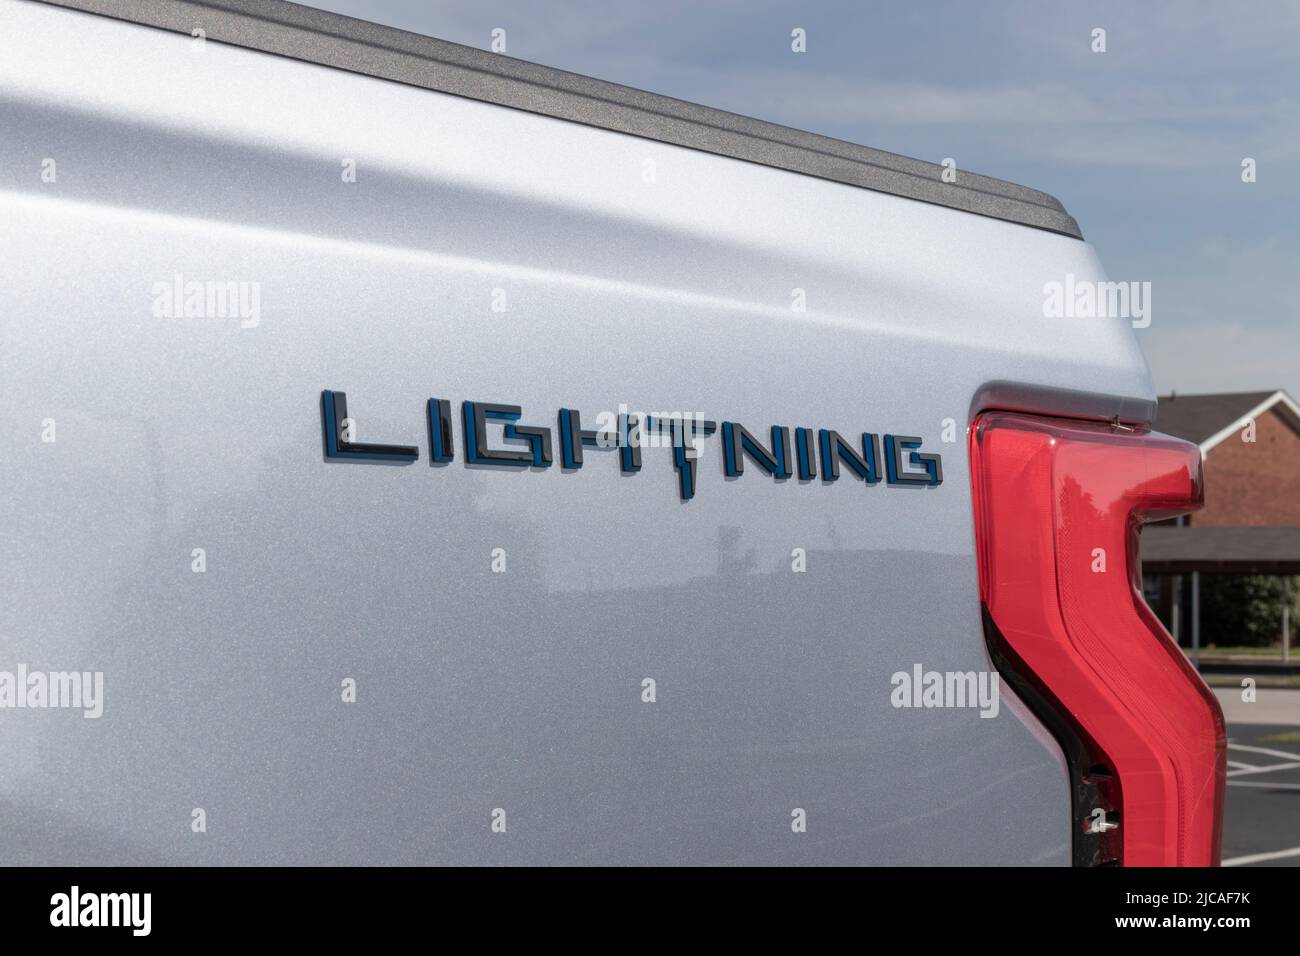 Kokomo - Circa June 2022: Ford F-150 Lightning display. Ford offers the F150 Lightning all-electric truck in Pro, XLT, Lariat, and Platinum models. Stock Photo